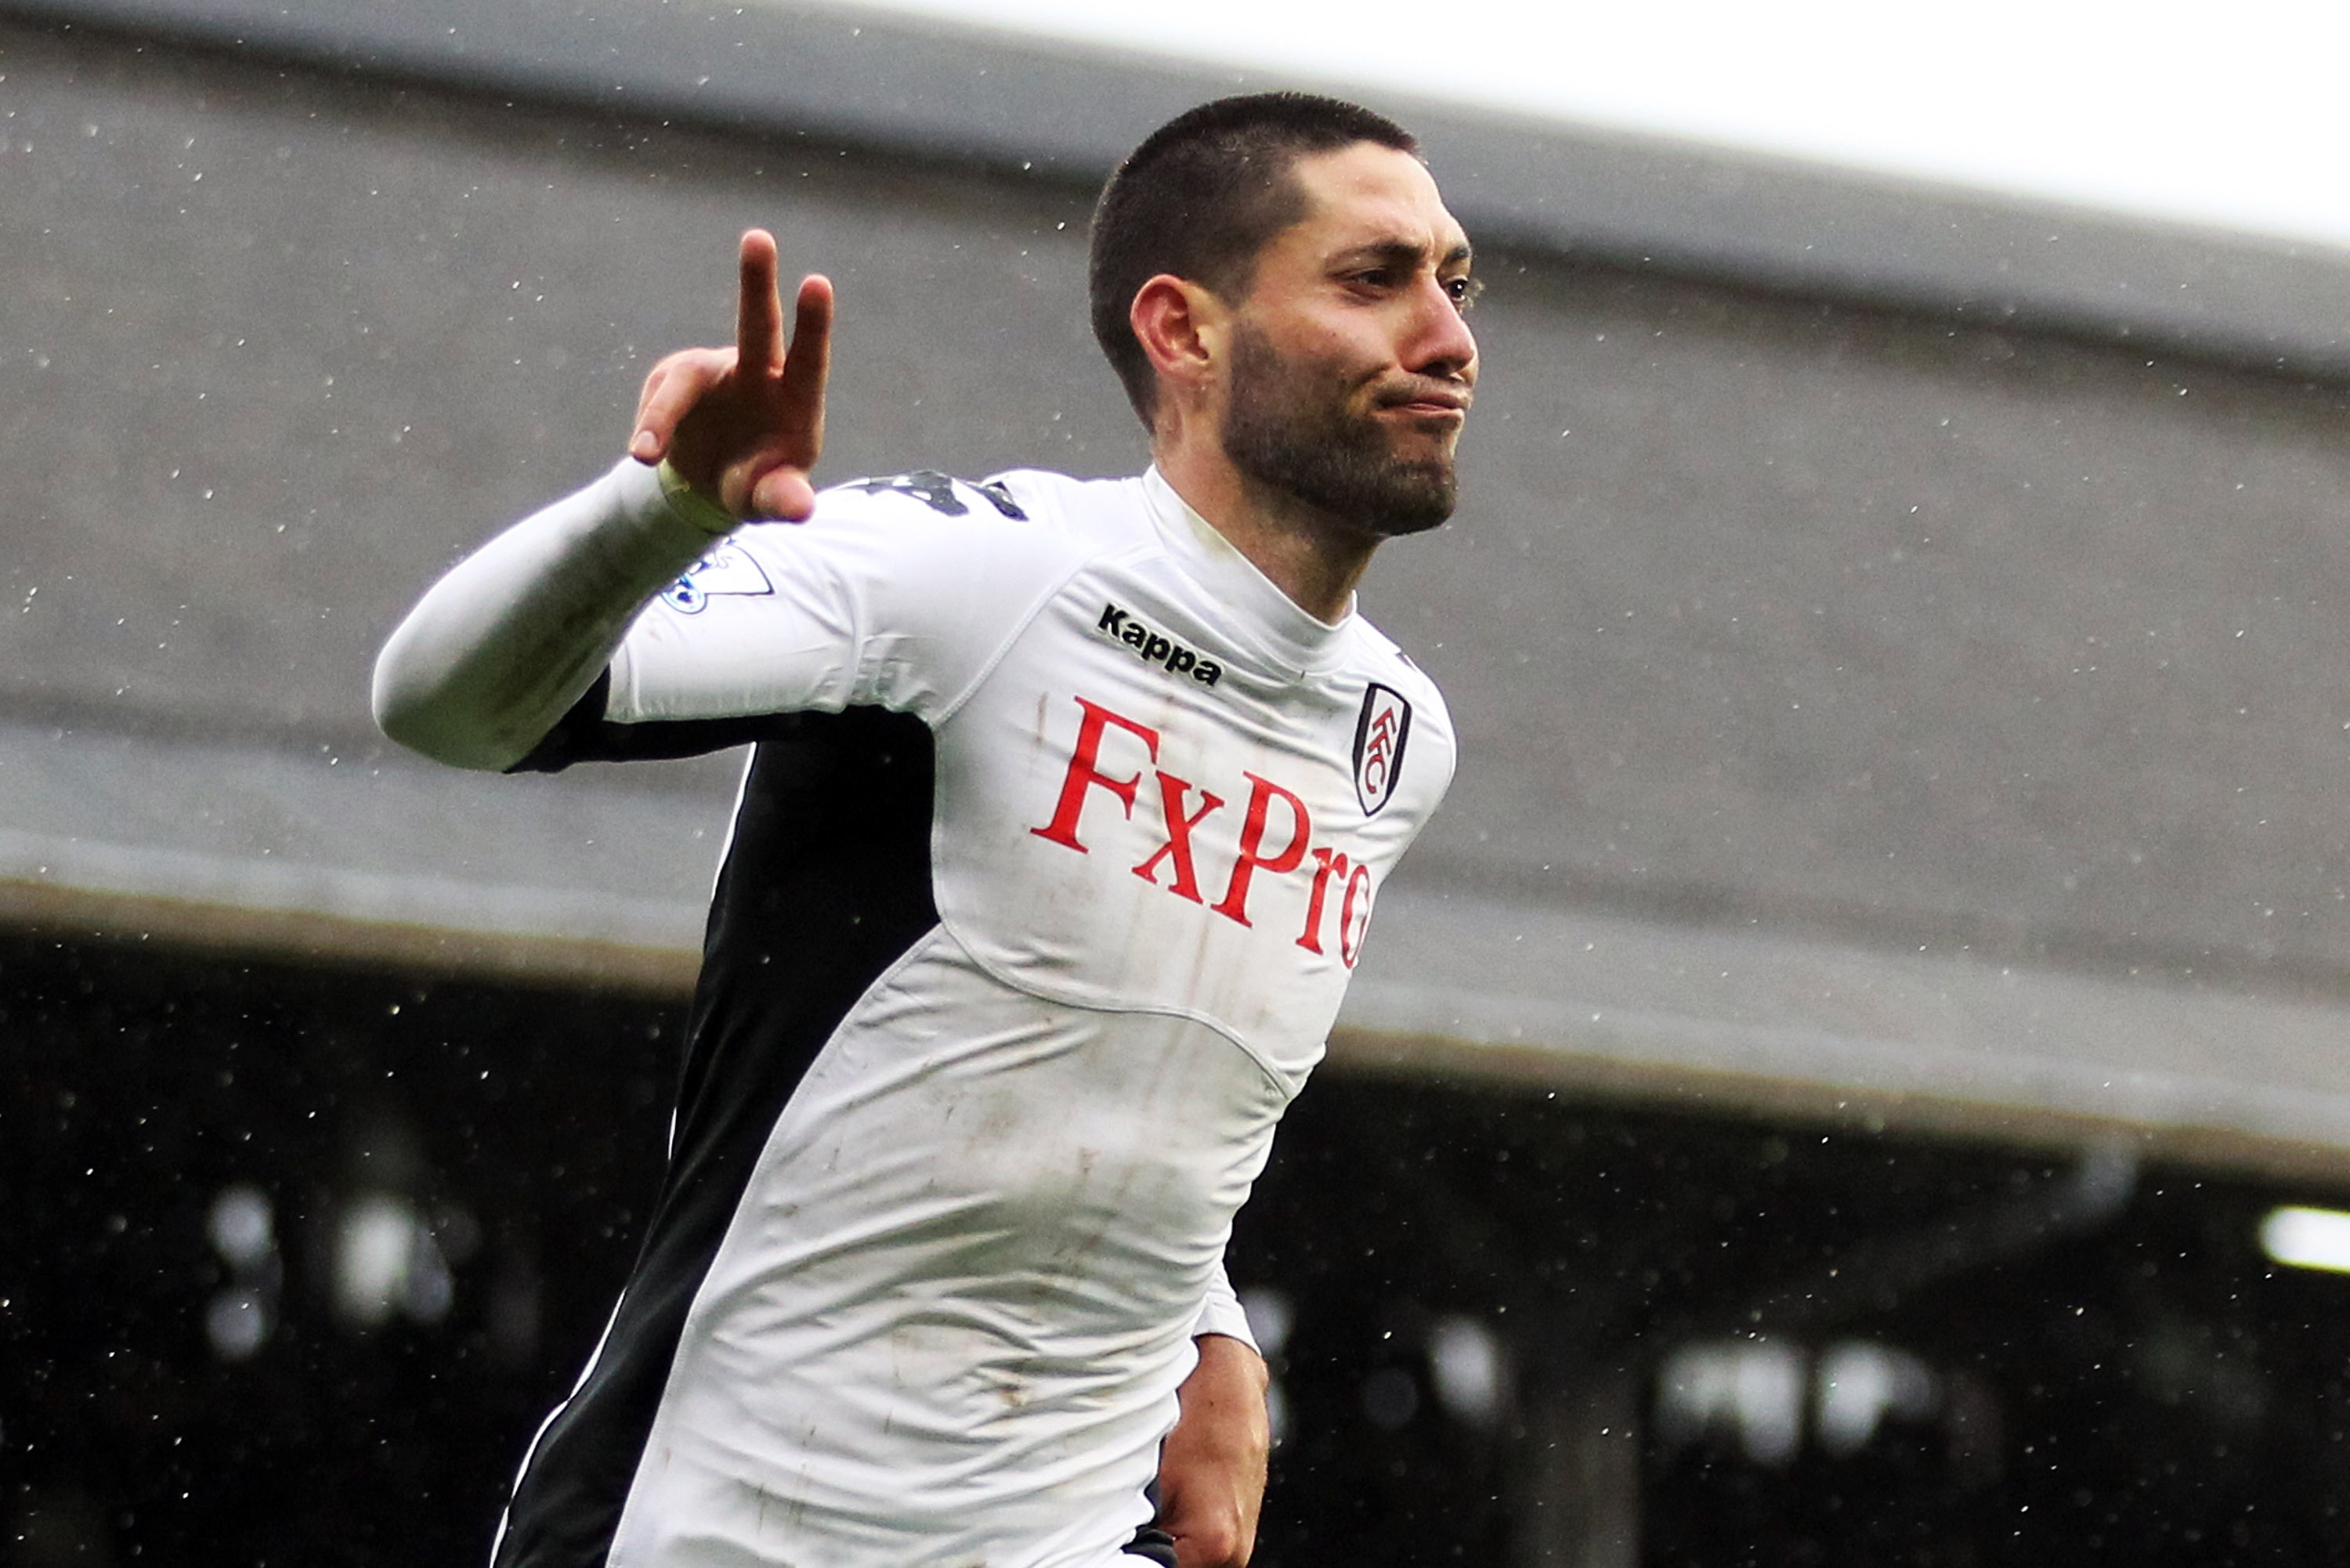 Where does Clint Dempsey fit in at Spurs?